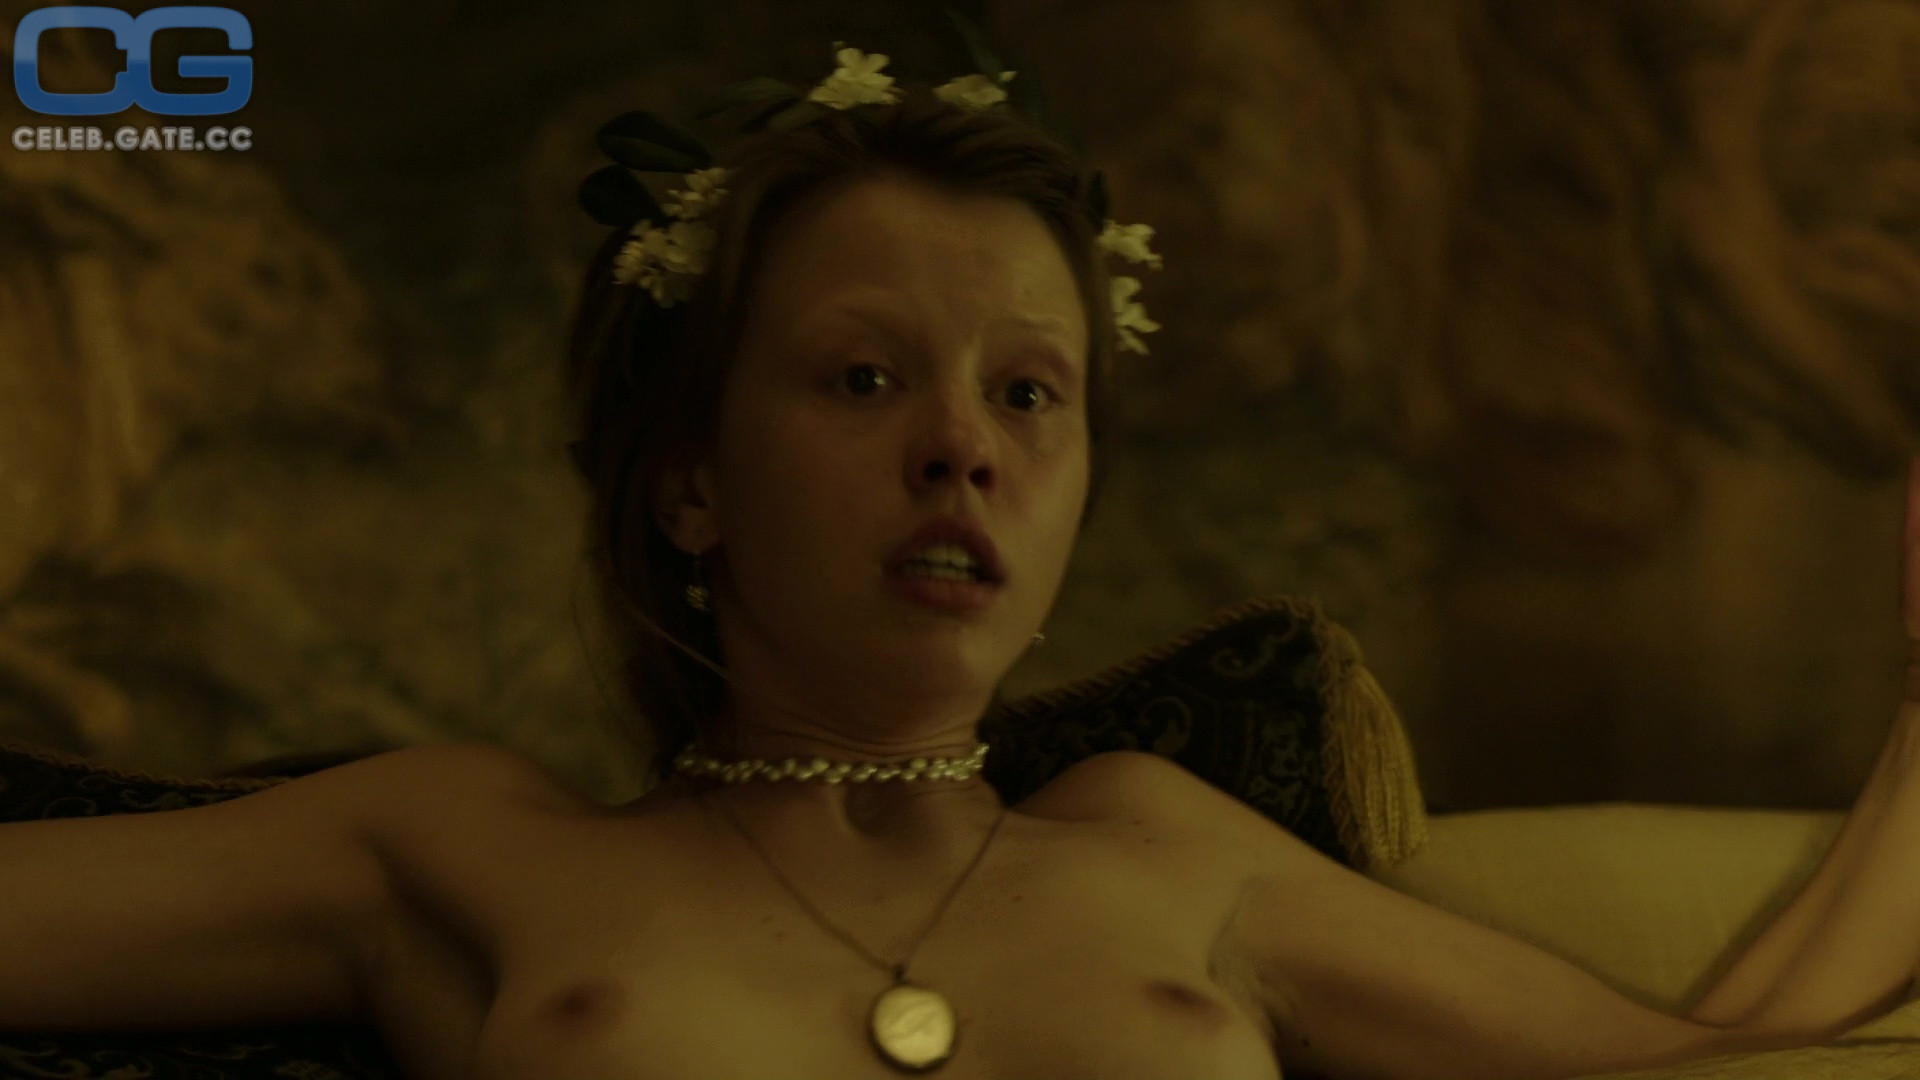 aaron burg recommends mia goth naked pic